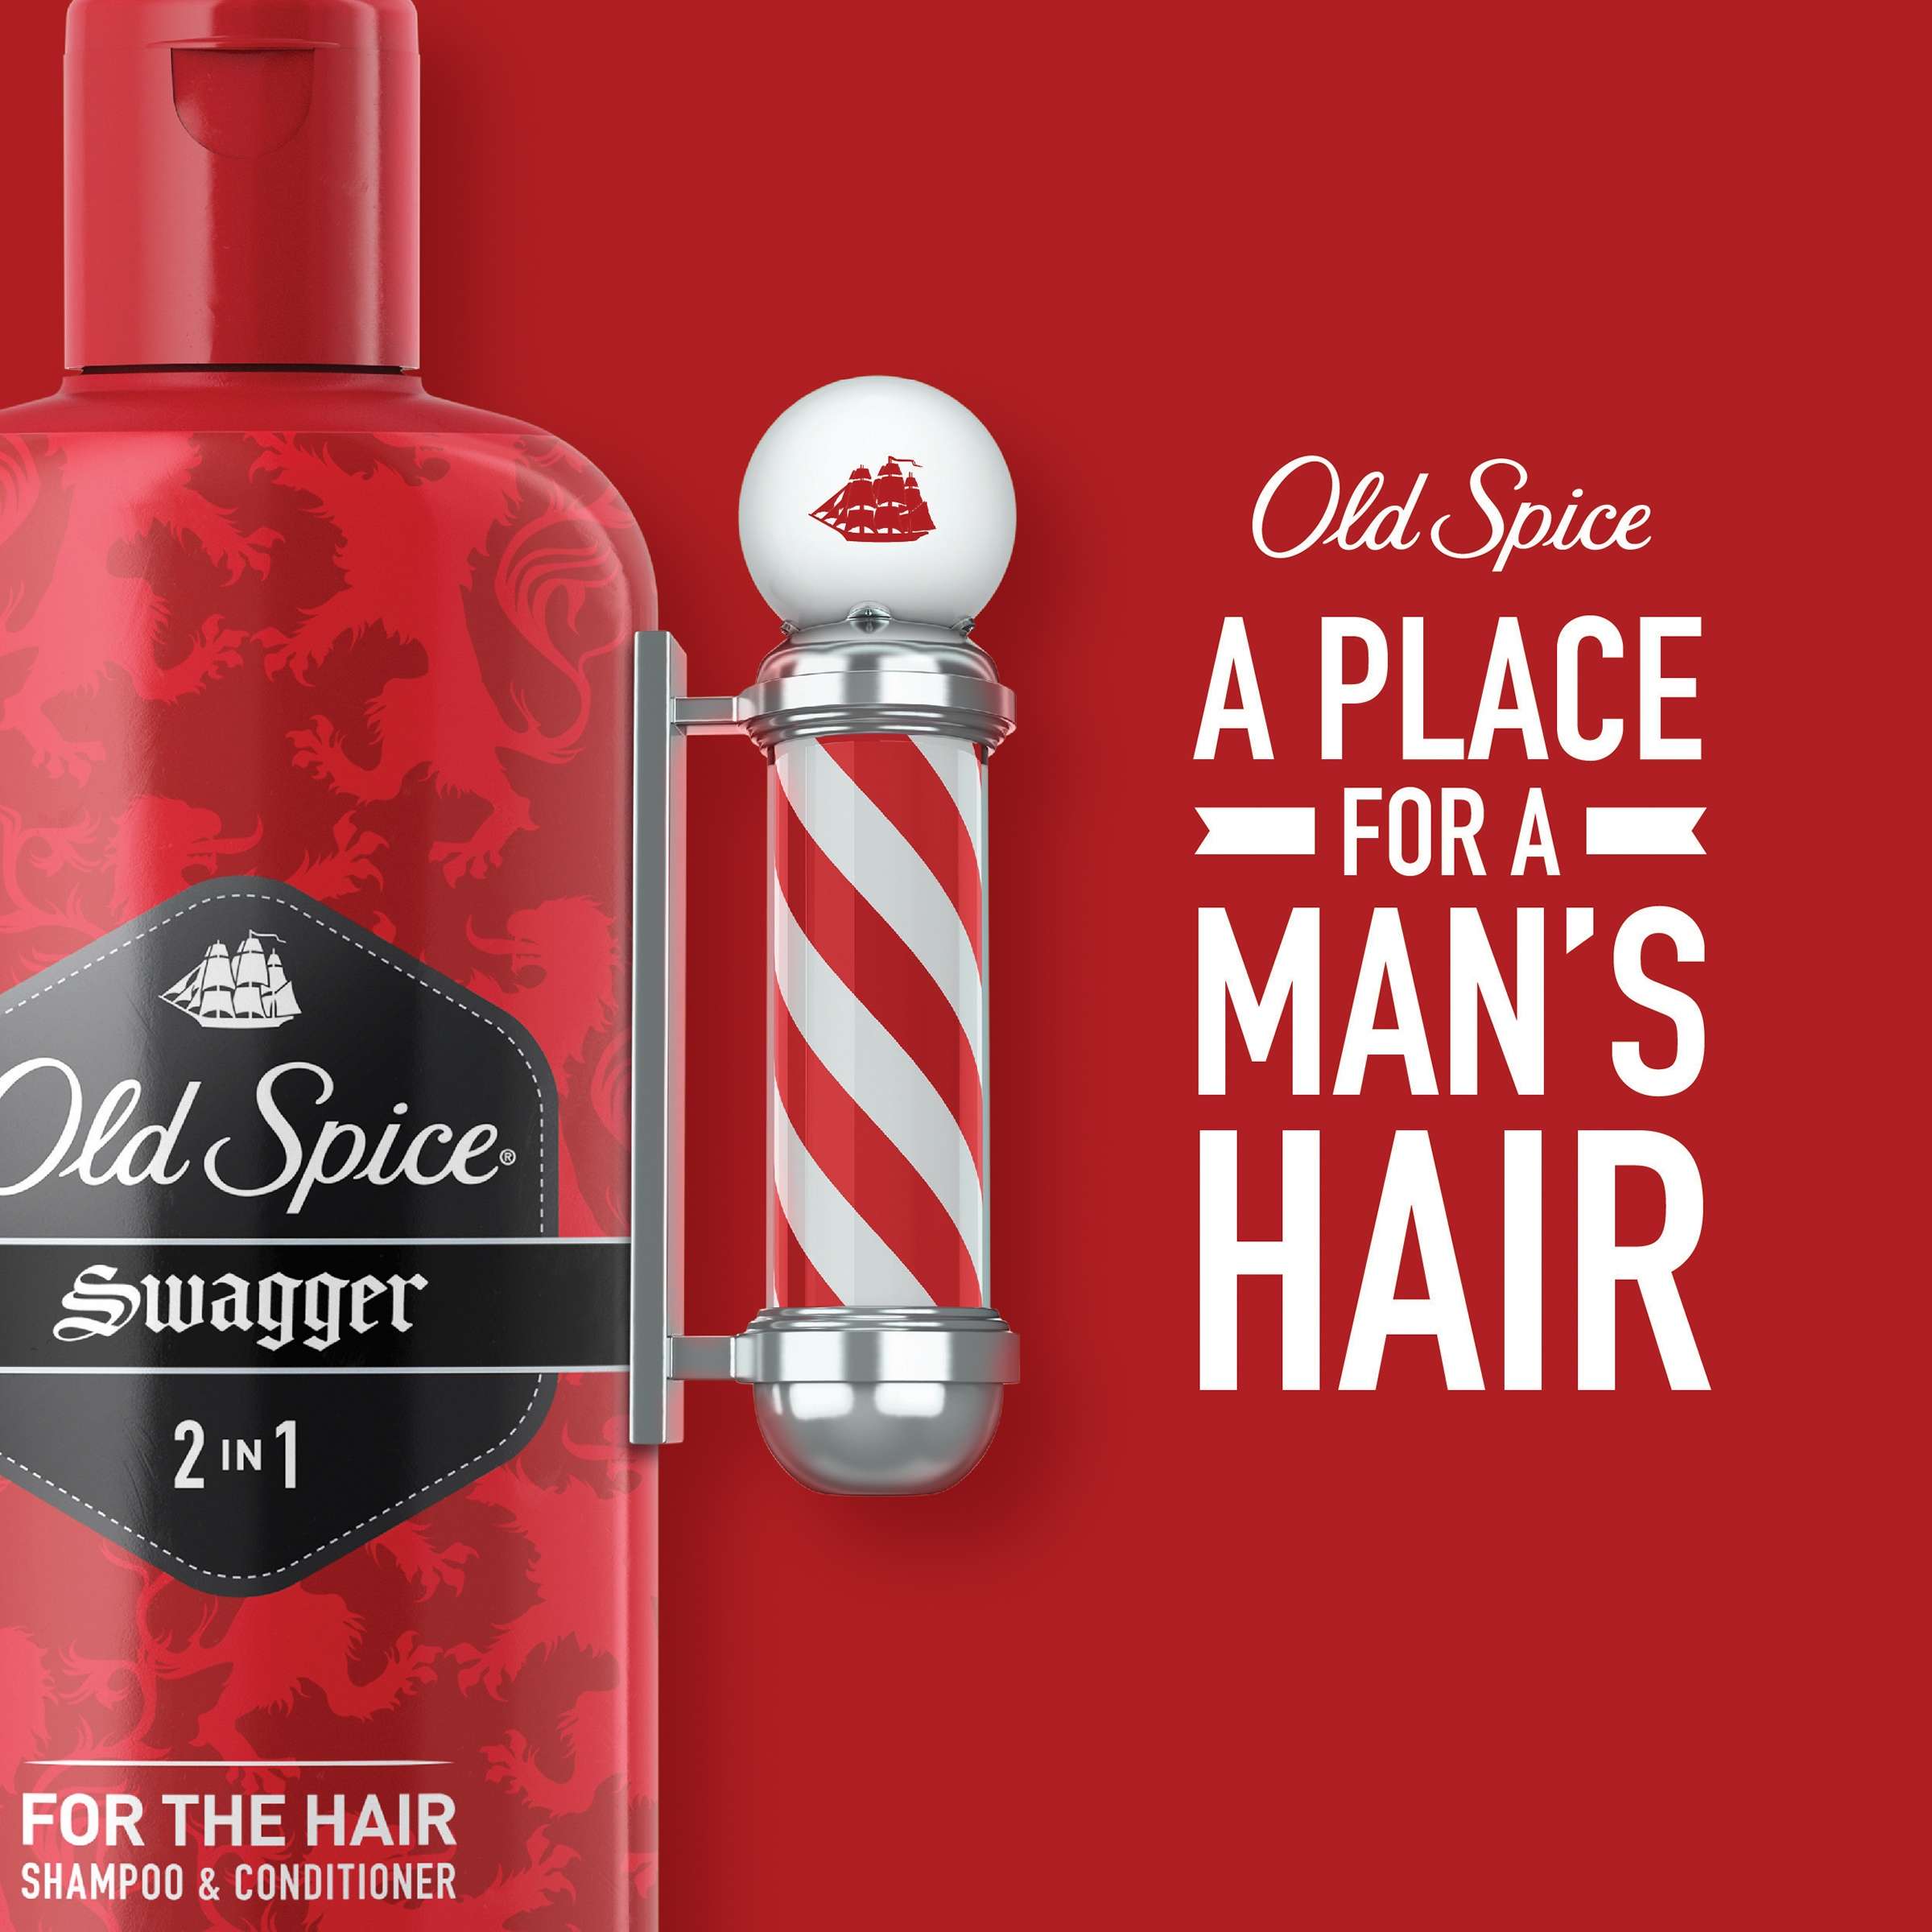 Old Spice Swagger Hardest Working Collection Body Wash, Deodorant and Shampoo & Conditioner Gift of Confidence Gift Pack (Free Socks Included) - image 4 of 6